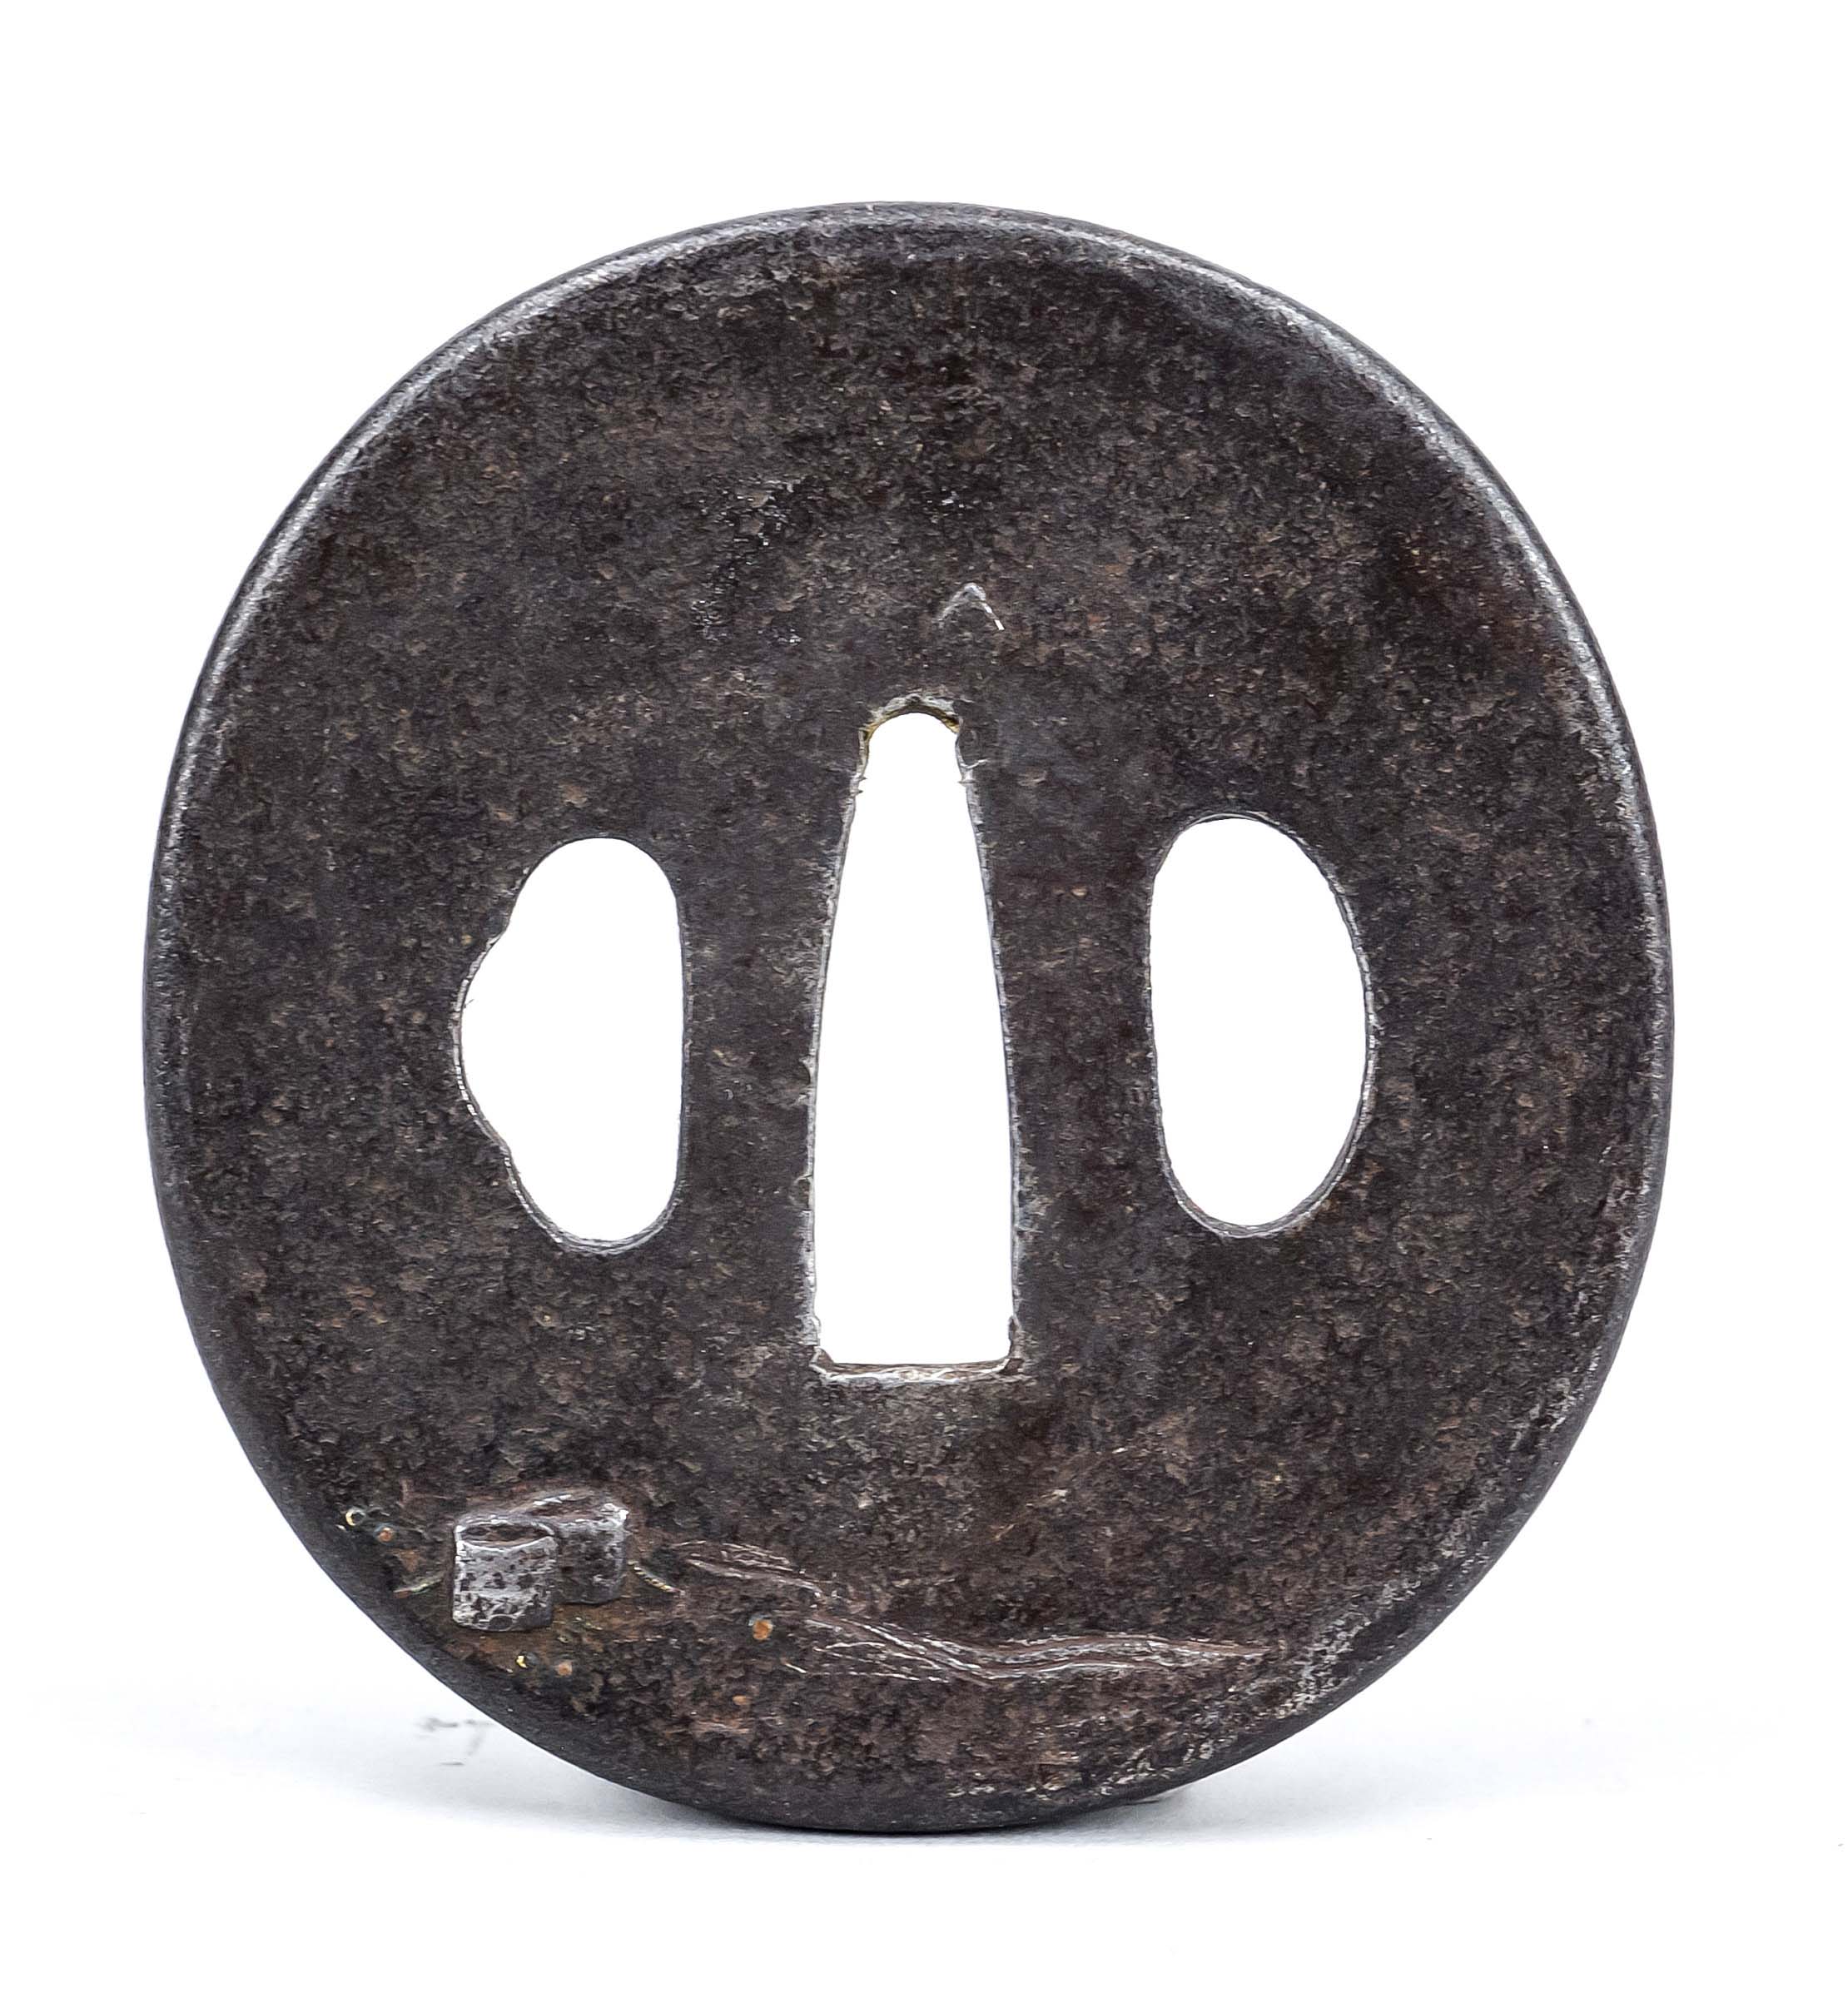 Tsuba, Japan 18th/19th century, Edo period, iron. Relief decoration with boy and water buffalo, - Image 2 of 2